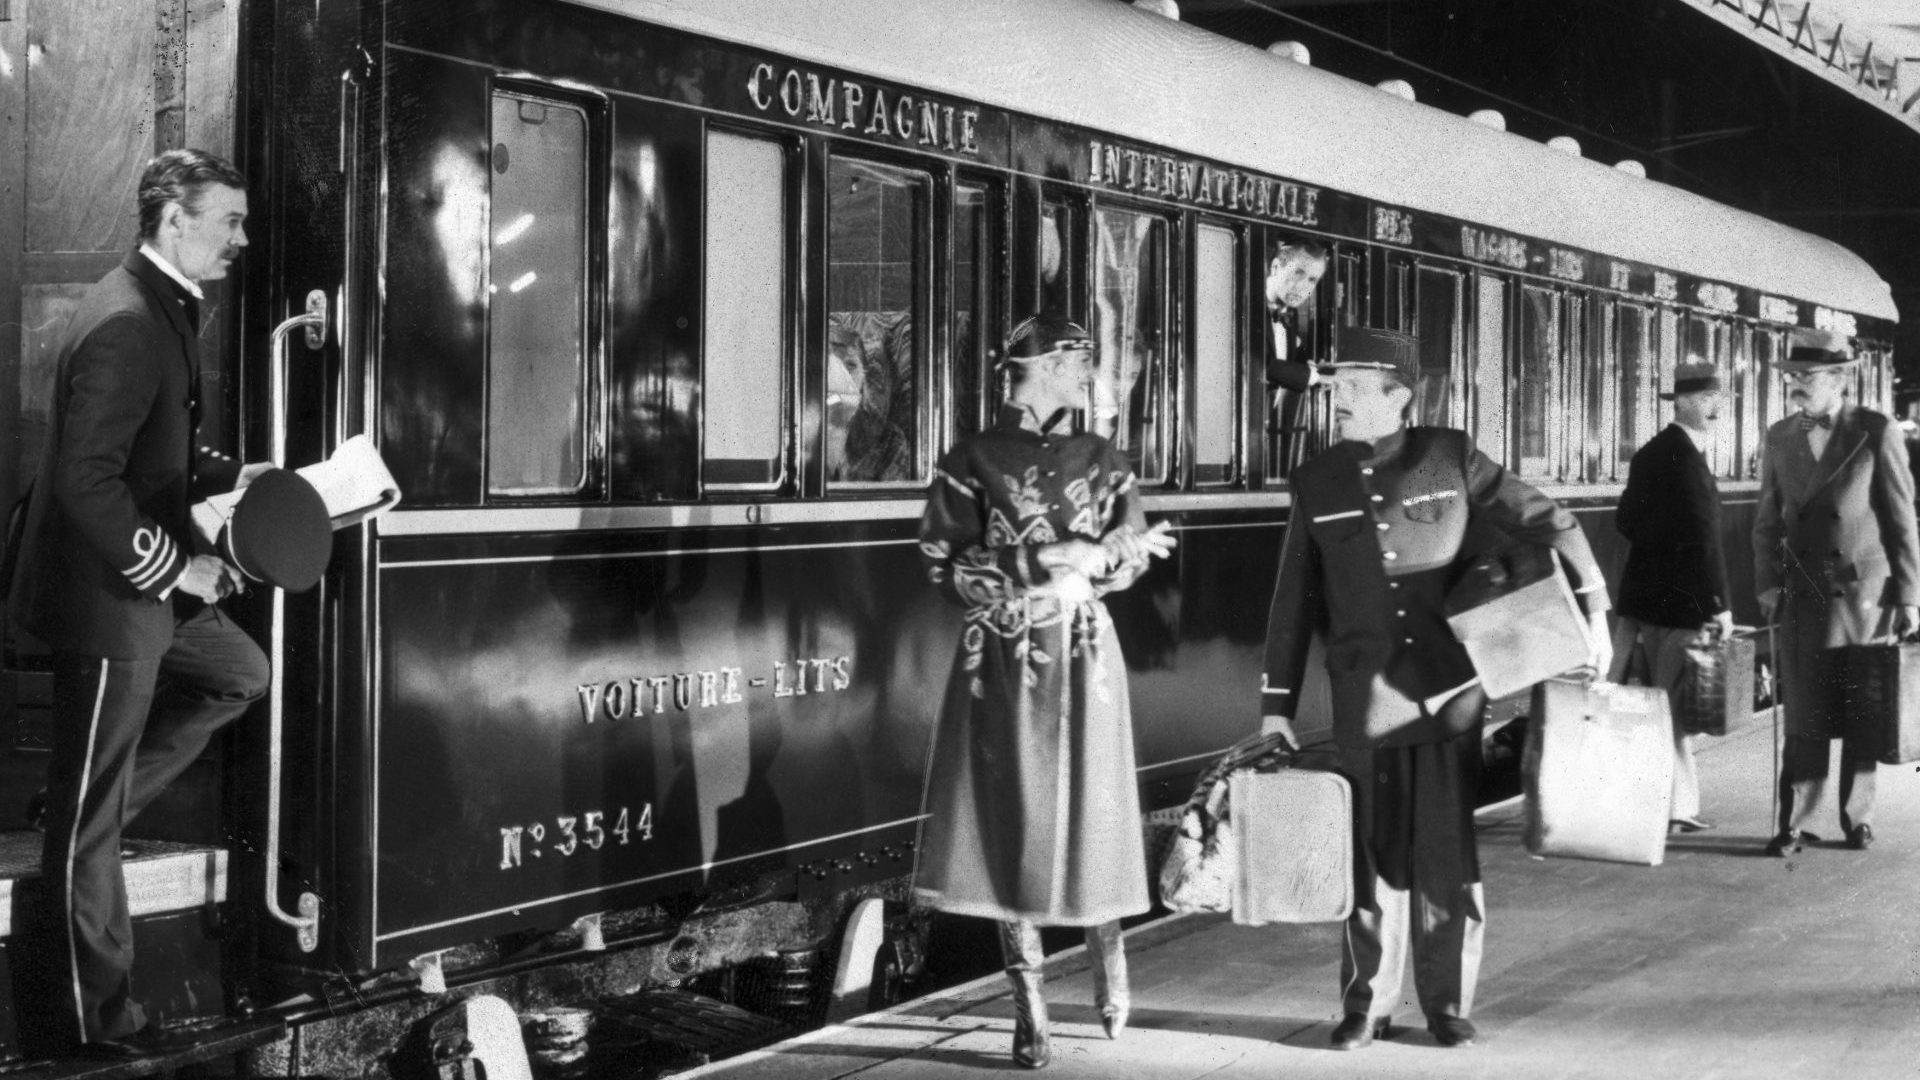 The Venice-Simplon Orient Express (VSOE) was established as a private venture in 1982. It ran restored 1920s and 1930s carriages from London to Venice. (Photo by SSPL/Getty Images)